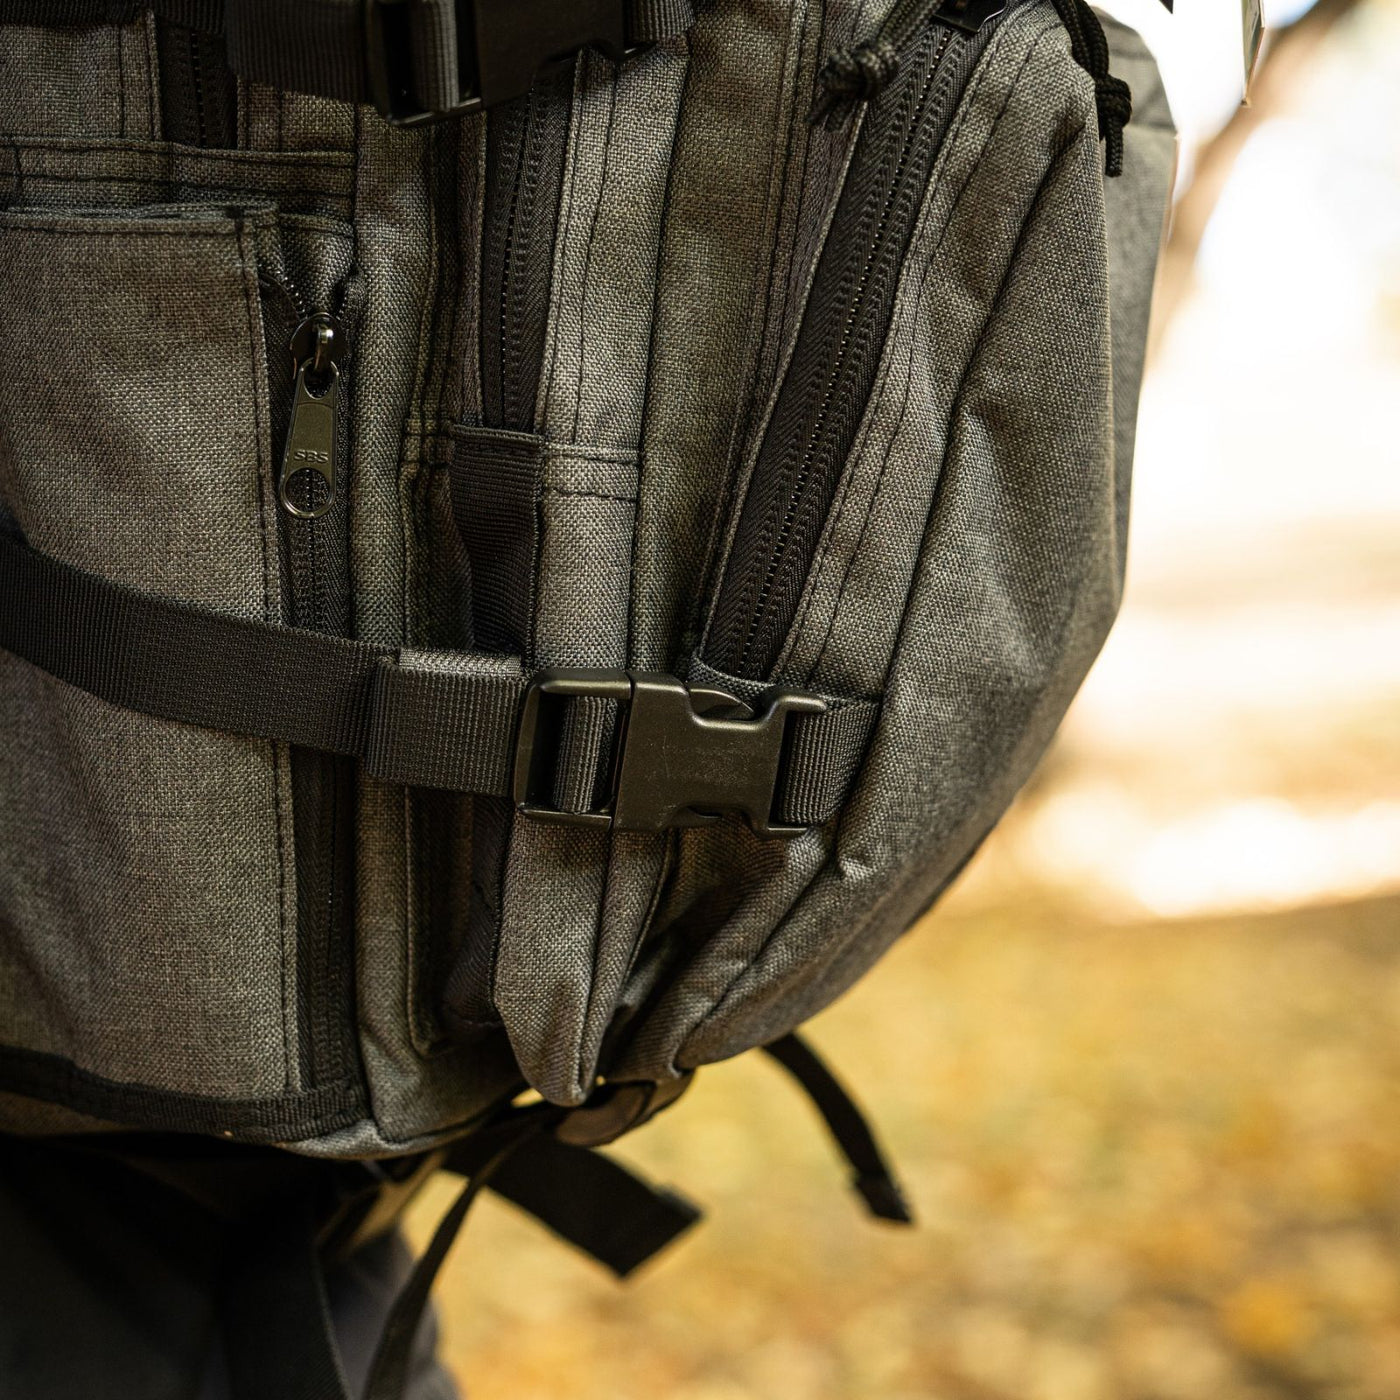 Bug Out Bag - Complete Covert Kit